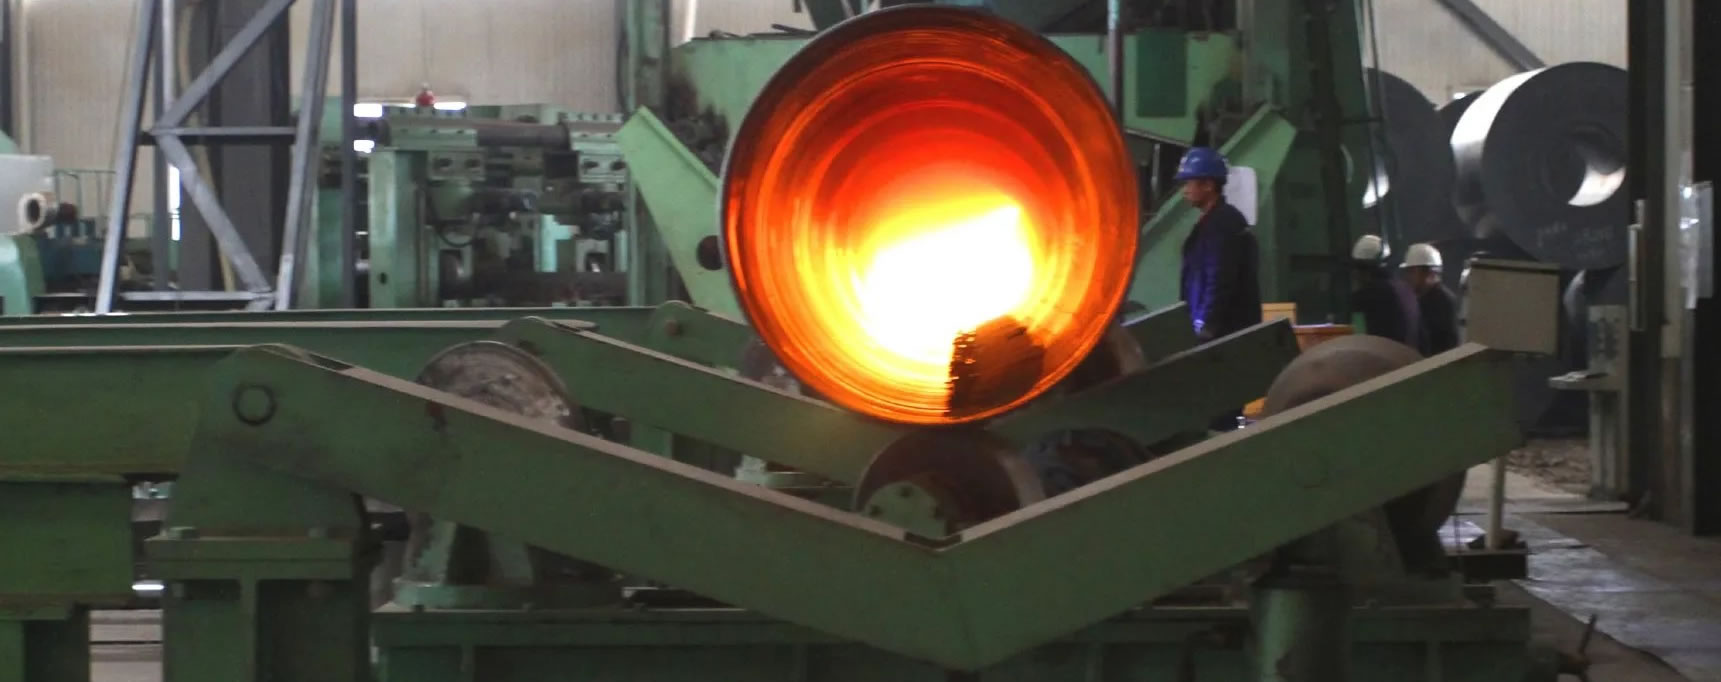 Spiral steel pipe manufacturing process